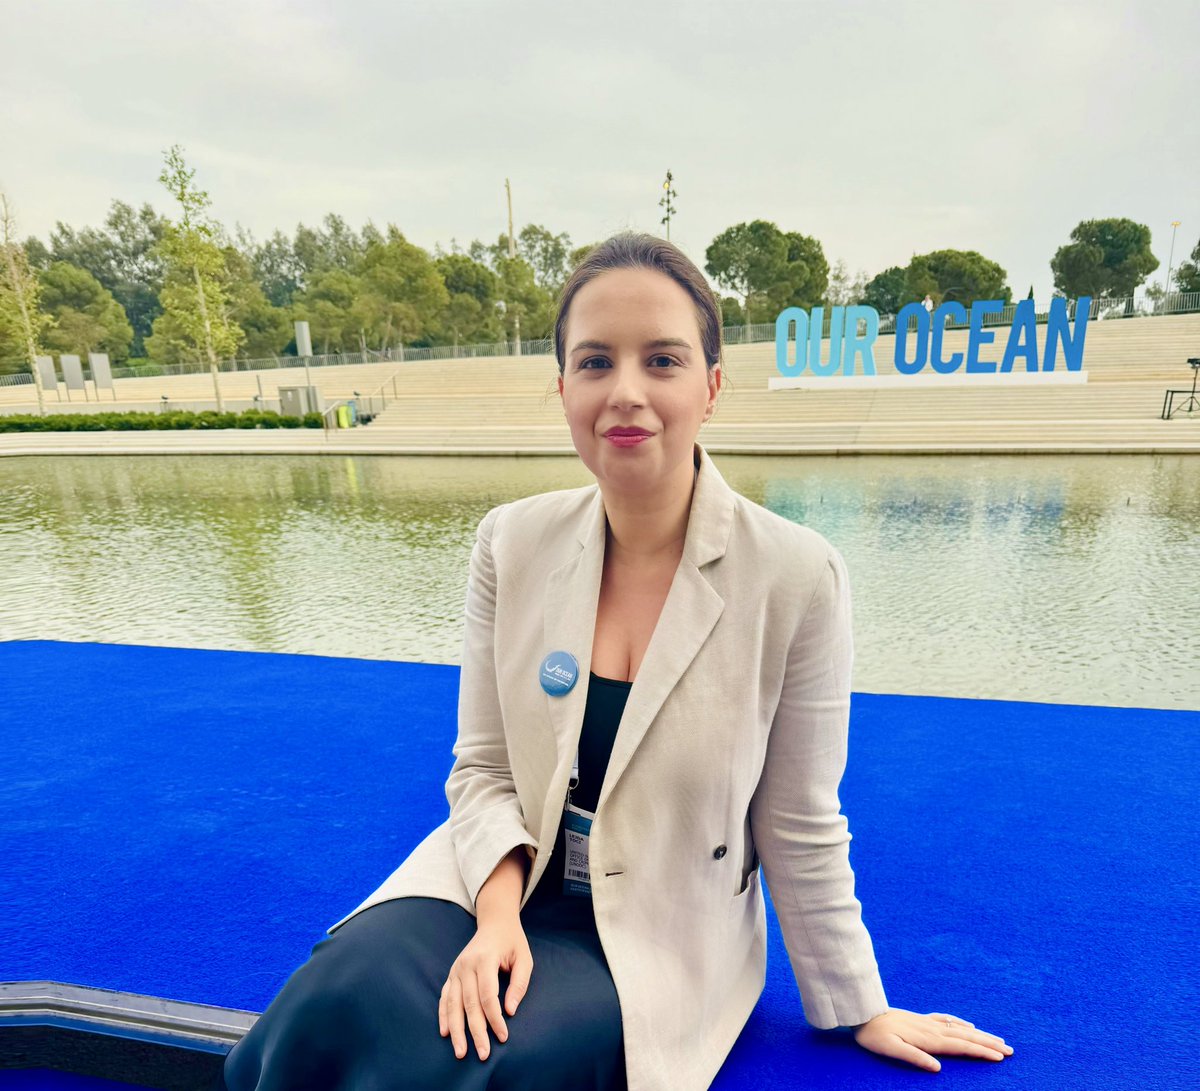 Attended @OurOceanGreece to host a @UNODC @FAO @ILO @MontereyAq Side Event, present the Legislative Guide on #crimesinfisheries & meet with partners in our fight to protect the ocean from crime. 

Inspiring 2 days of discussions & special pleasure to see OOC come to the Med! 🇬🇷